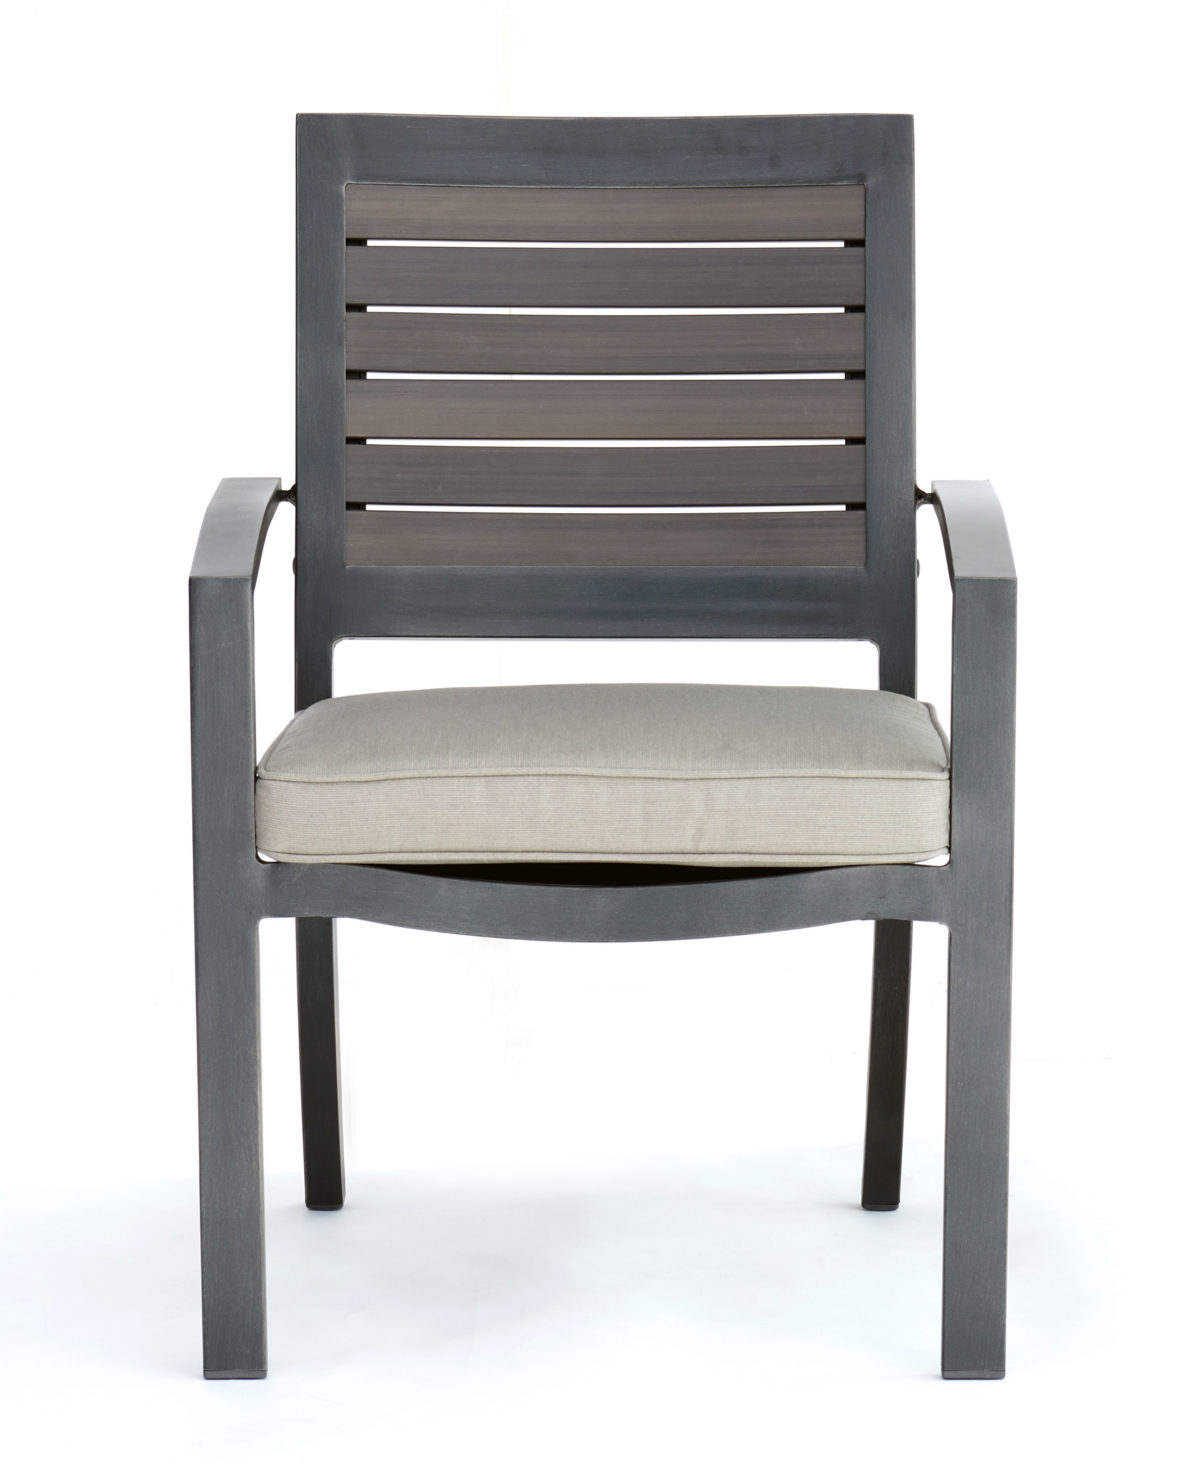 Agio Closeout! Set Of 2 Marlough Ii Aluminum Outdoor Dining Chairs, Created For Macy's In Outdura Storm Smoke